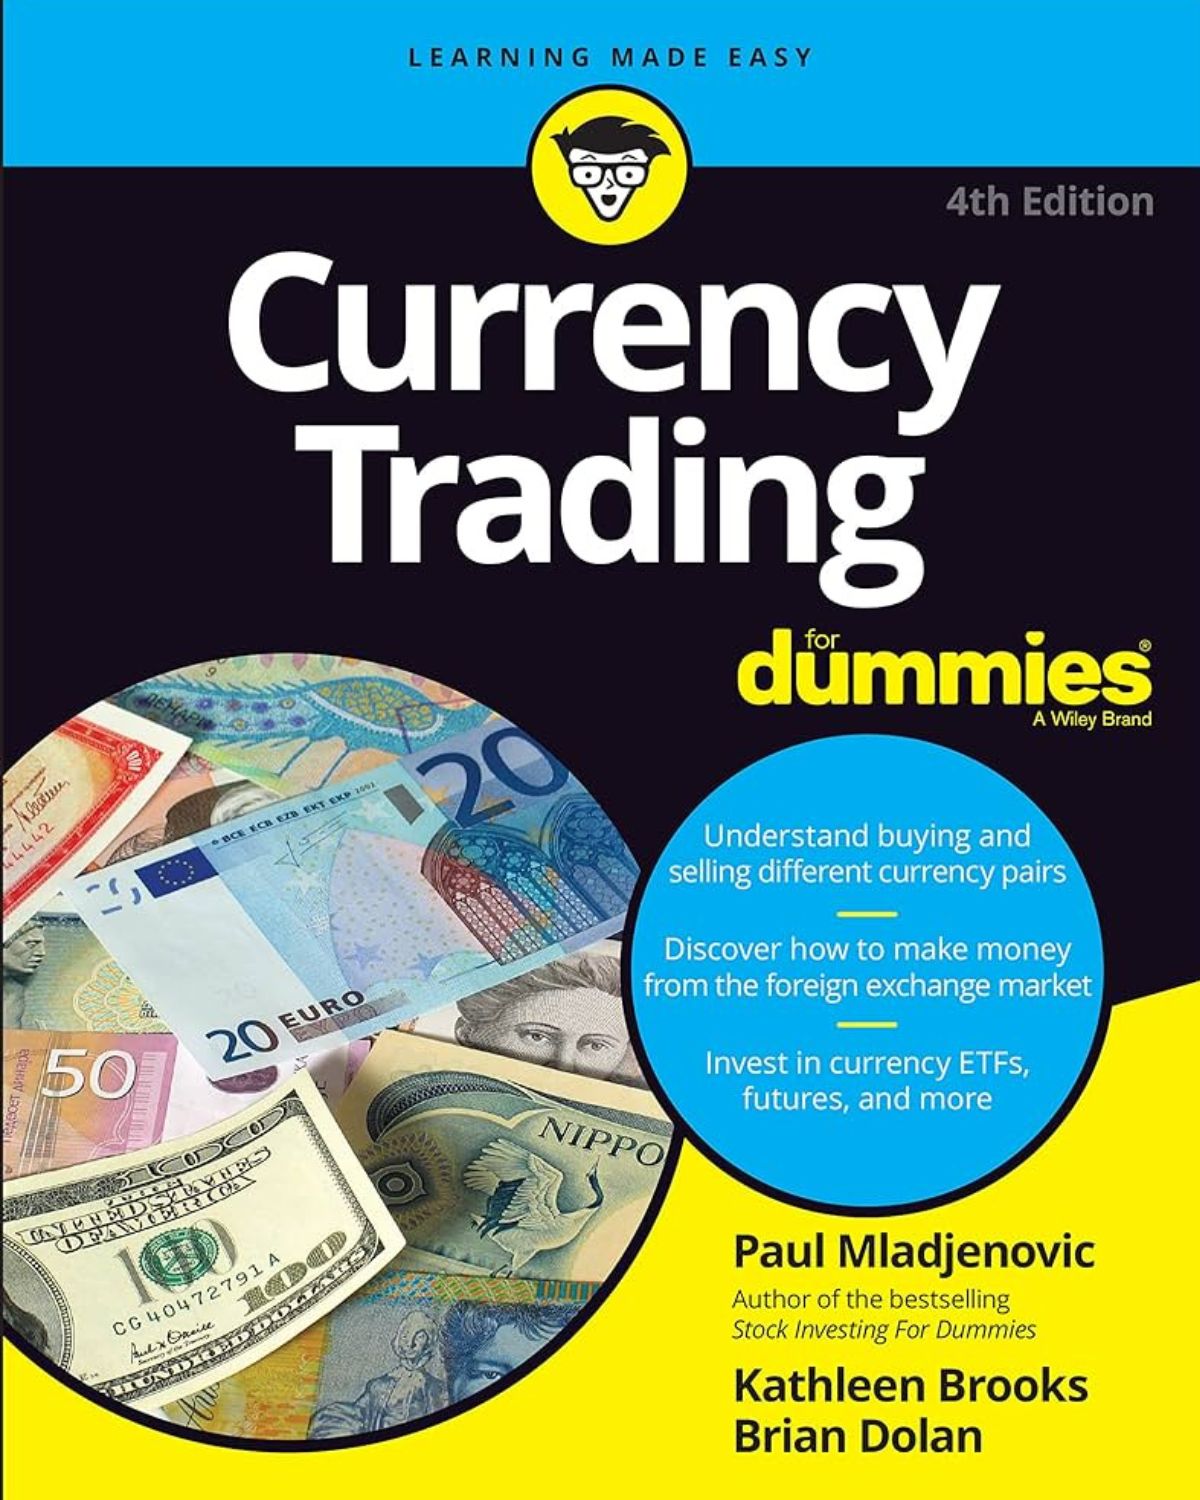 Currency Trading for Dummies by Brian Dolan and Kathleen Brooks.jpg